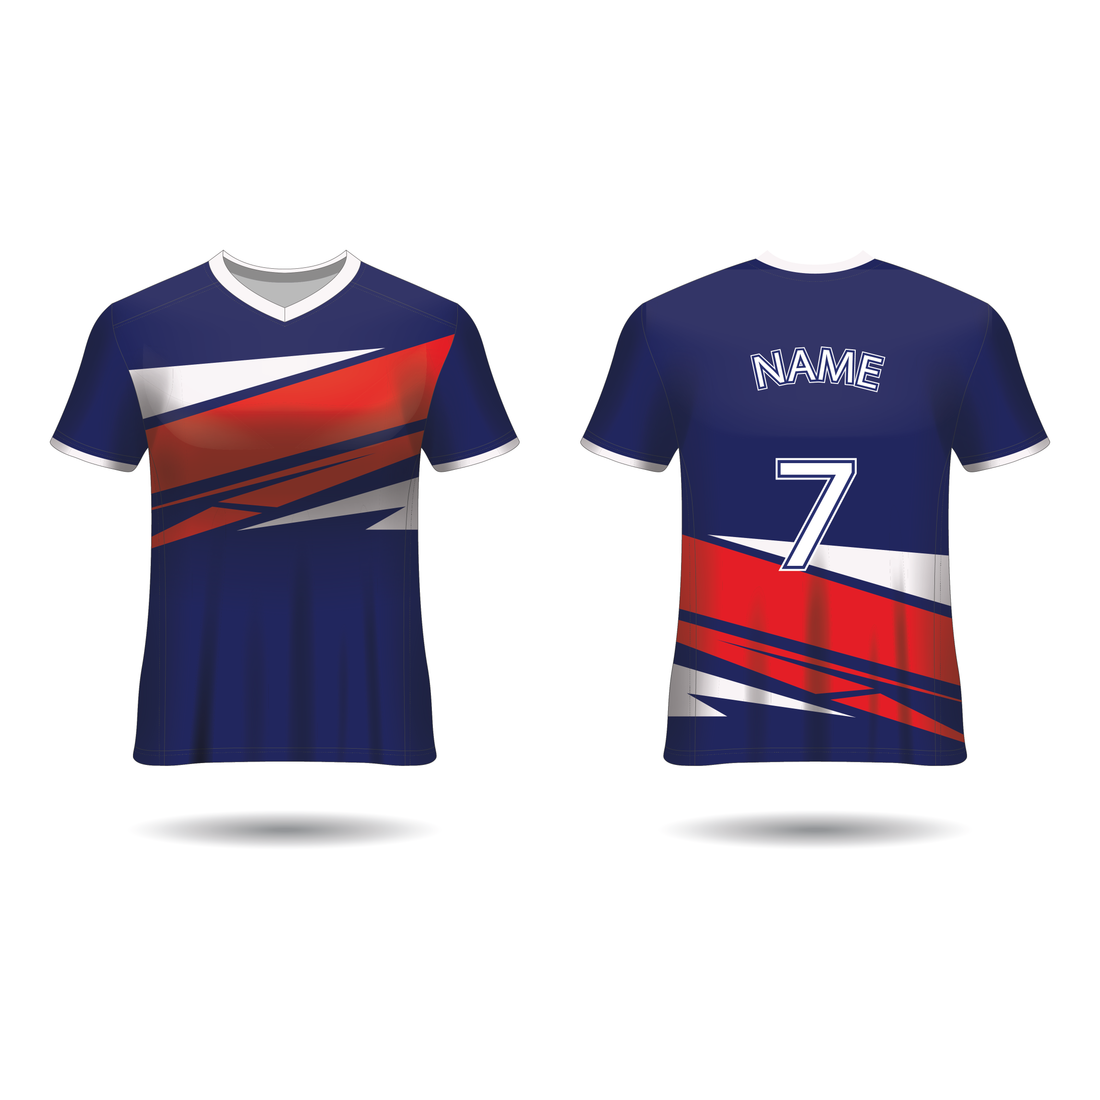 NEXT PRINT All Over Printed Customized Sublimation T-Shirt Unisex Sports Jersey Player Name & Number, Team Name NP50000251